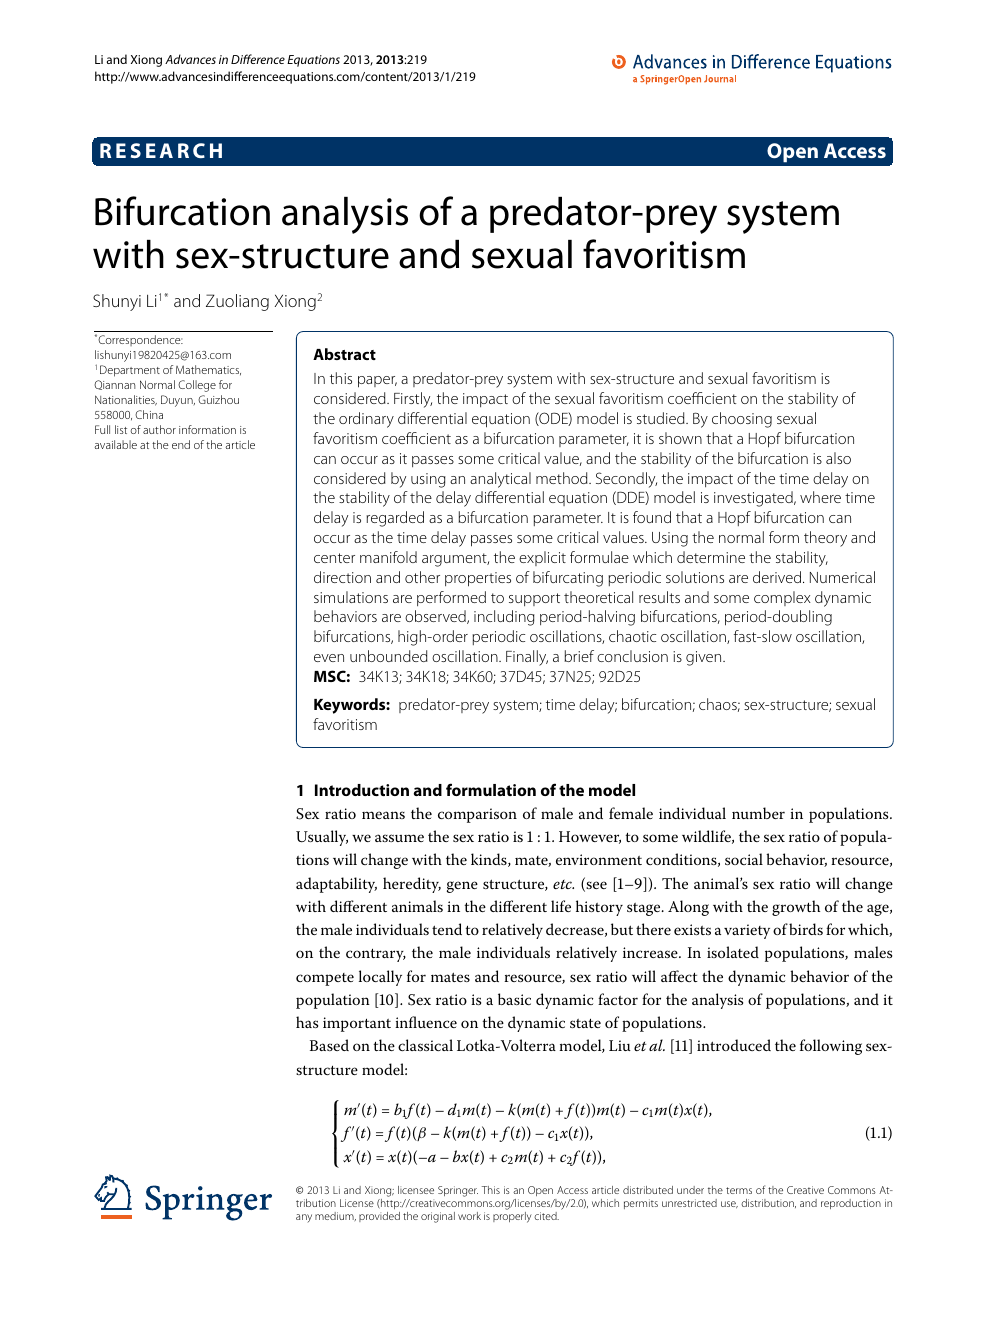 Bifurcation Analysis Of A Predator Prey System With Sex Structure And Sexual Favoritism Topic Of Research Paper In Mathematics Download Scholarly Article Pdf And Read For Free On Cyberleninka Open Science Hub